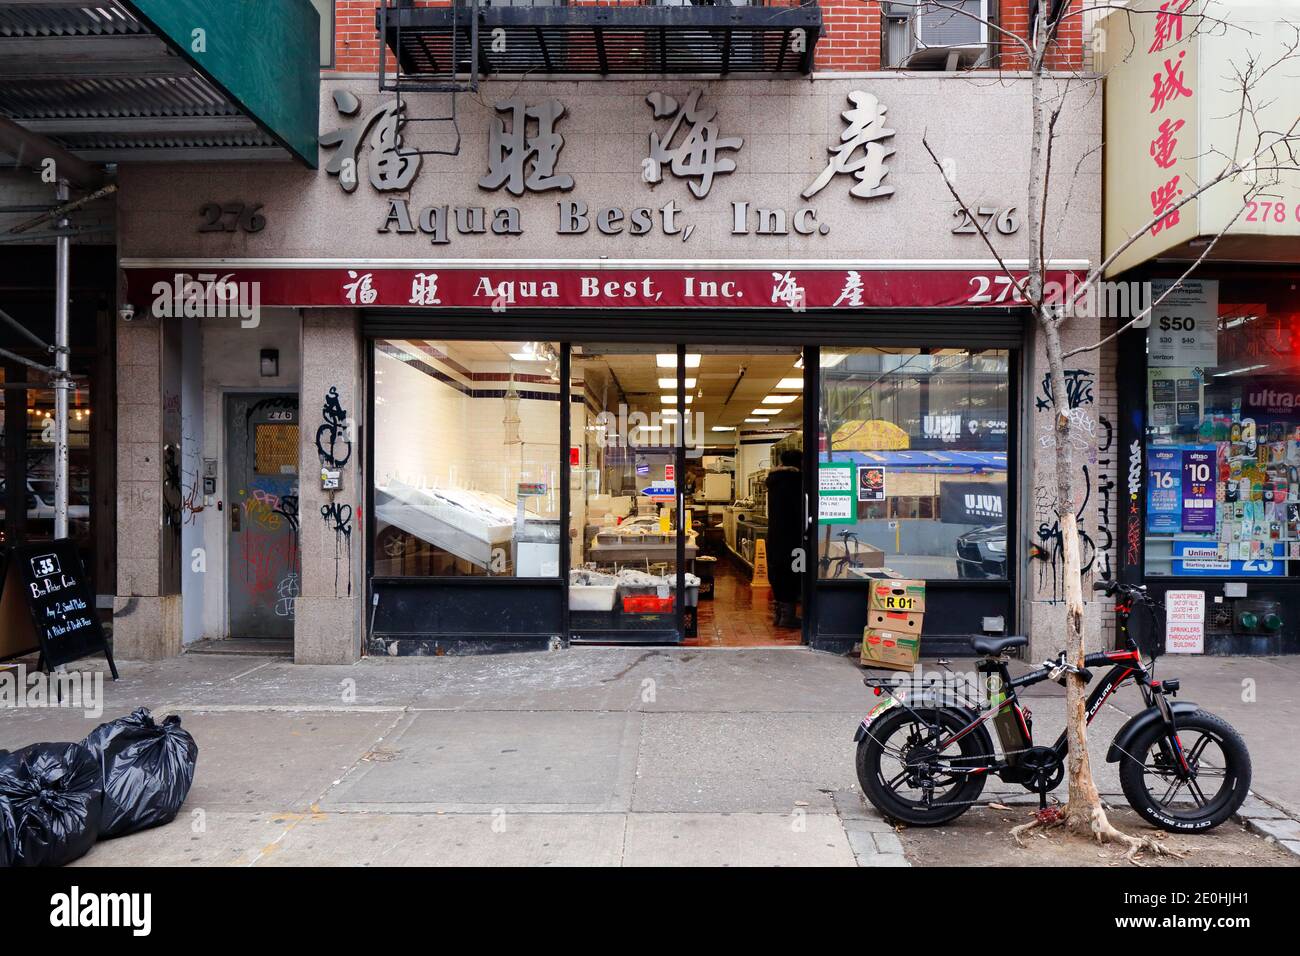 Aqua Best 福旺海產, 276 Grand St, New York, NYC storefront photo of a seafood distributor and fish market in Manhattan Chinatown. Stock Photo